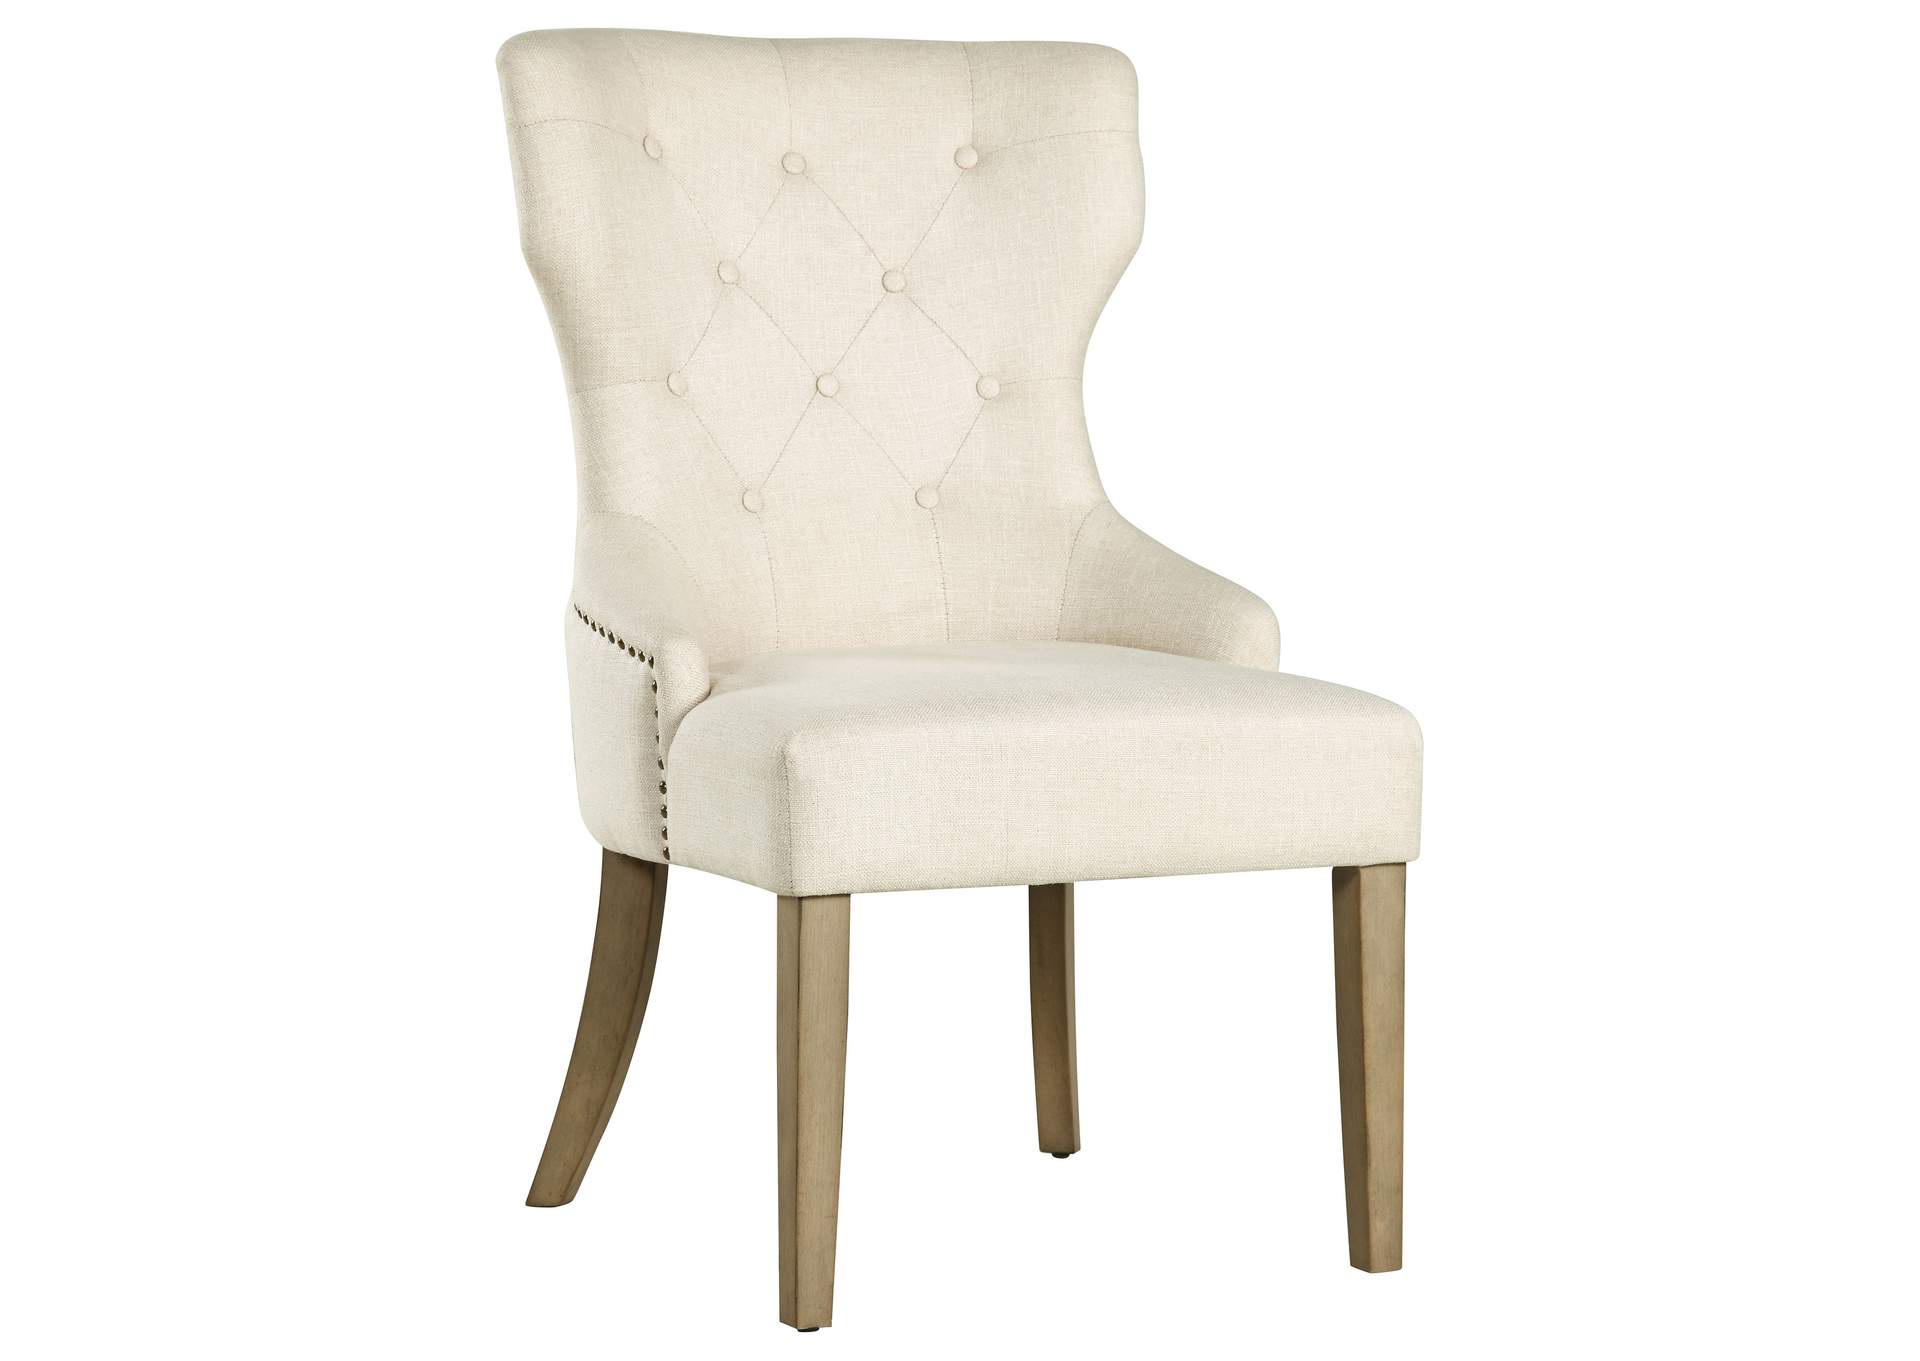 Baney Tufted Upholstered Dining Chair Beige,Coaster Furniture